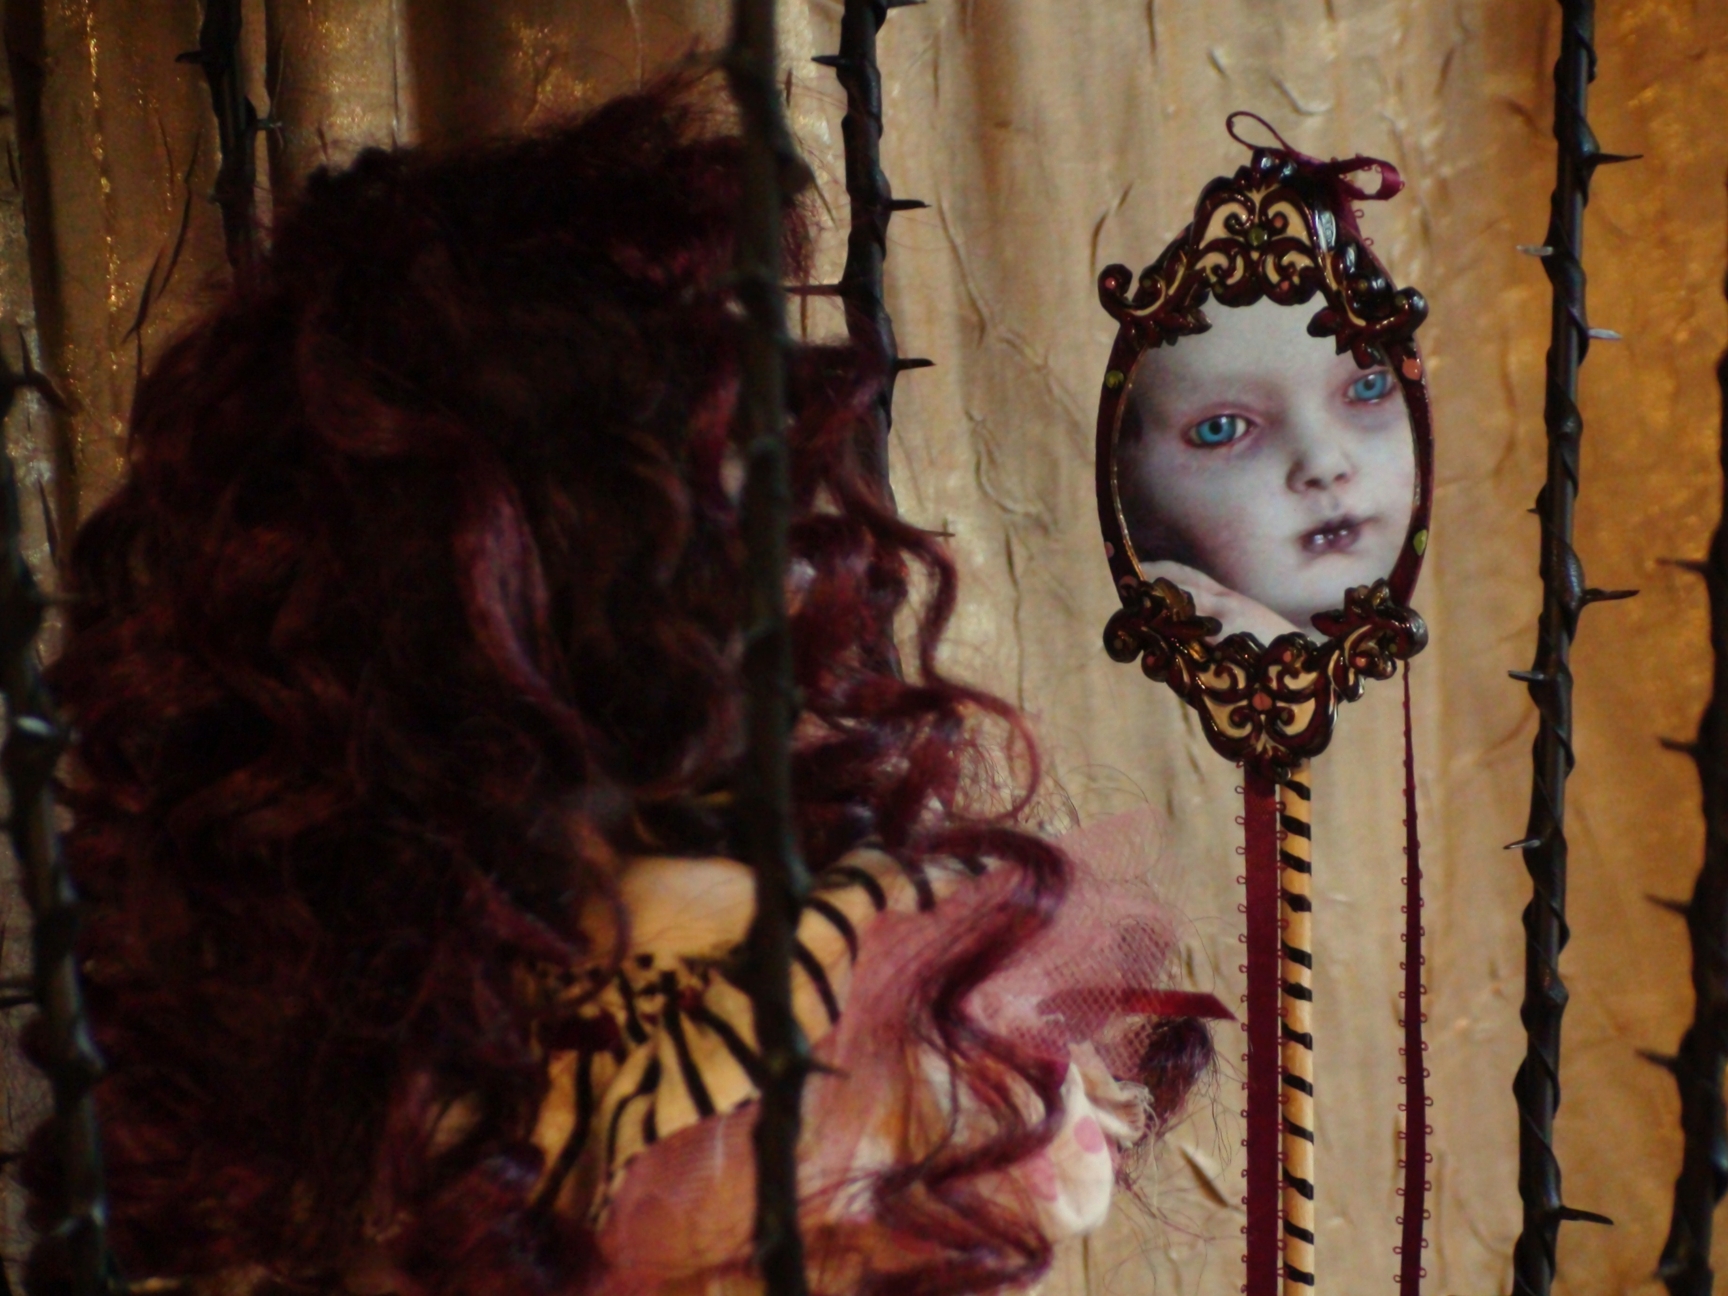 close-up of a pale red curly haired circus doll looking into an ornate mirror